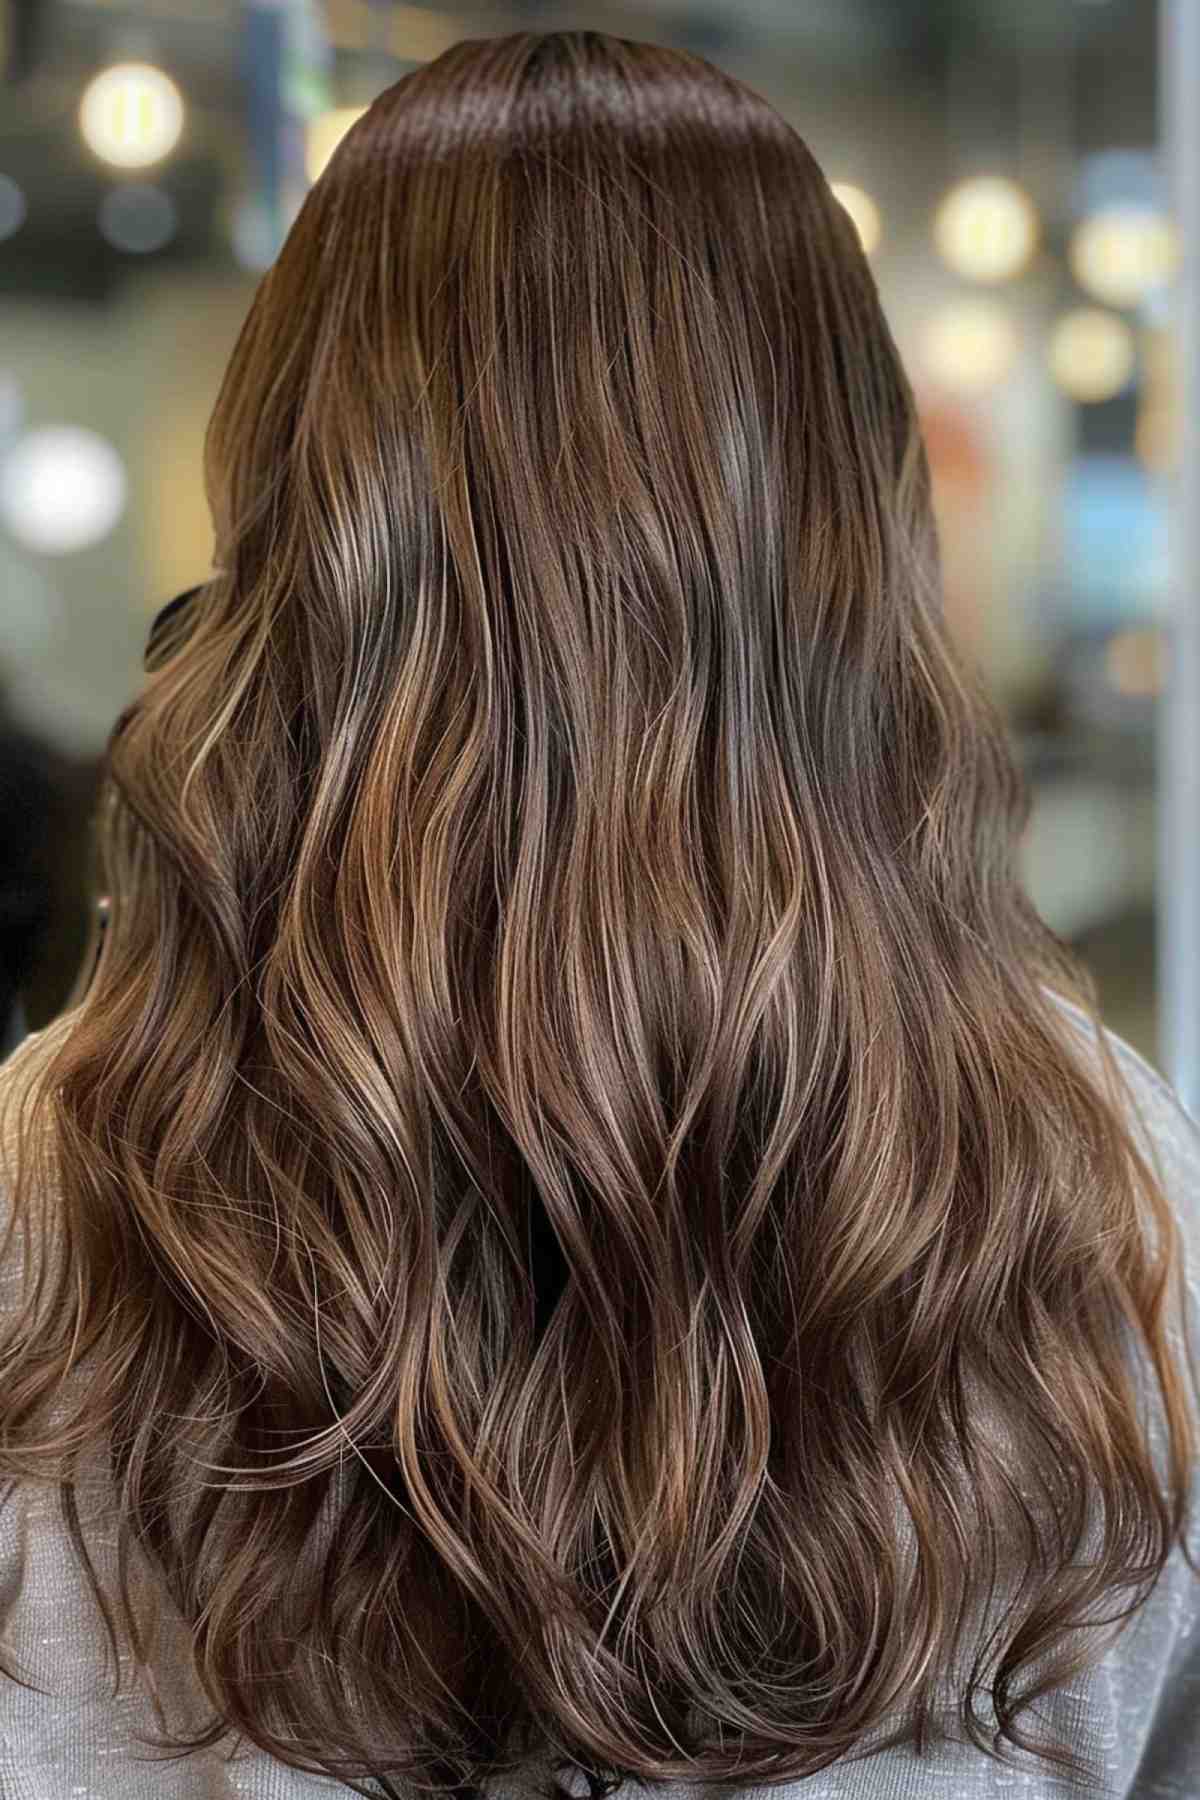 Long Thick Brunette Hair with Soft Brown Highlights and Waves